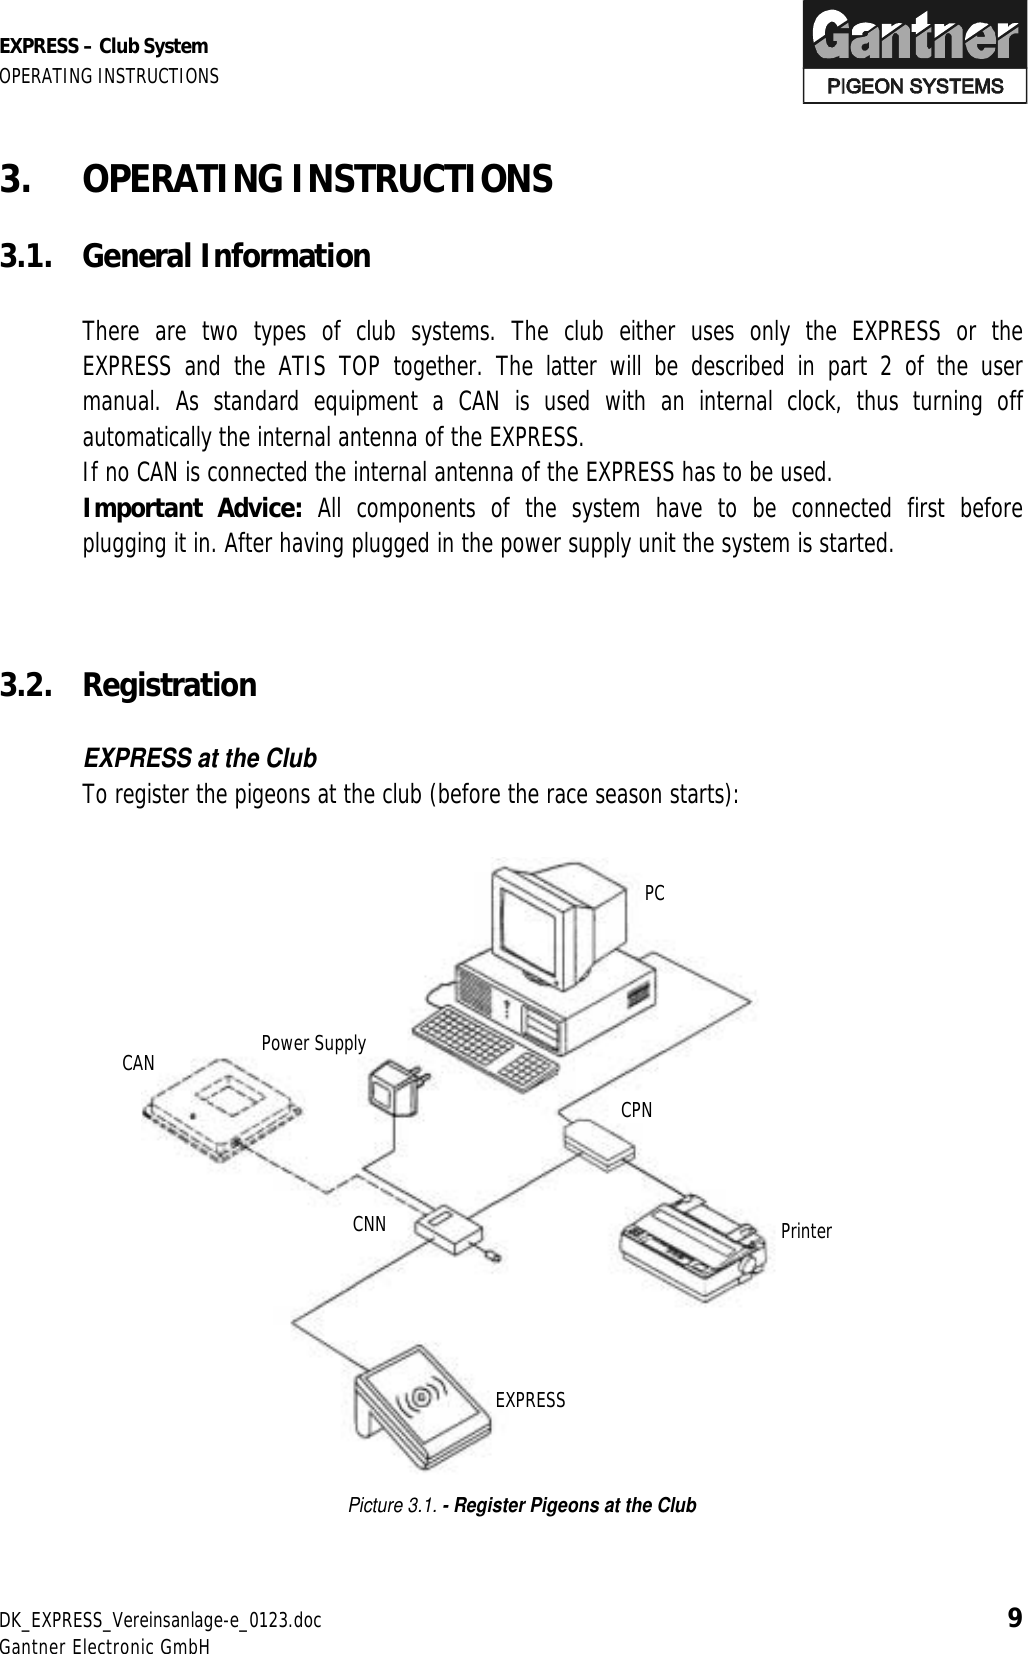 EXPRESS – Club System OPERATING INSTRUCTIONS DK_EXPRESS_Vereinsanlage-e_0123.doc 9 Gantner Electronic GmbH 3. OPERATING INSTRUCTIONS  3.1. General Information    There are two types of club systems. The club either uses only the EXPRESS or the EXPRESS and the ATIS TOP together. The latter will be described in part 2 of the user manual. As standard equipment a CAN is used with an internal clock, thus turning off automatically the internal antenna of the EXPRESS.   If no CAN is connected the internal antenna of the EXPRESS has to be used.  Important Advice: All components of the system have to be connected first before plugging it in. After having plugged in the power supply unit the system is started.    3.2. Registration    EXPRESS at the Club   To register the pigeons at the club (before the race season starts):                      Picture 3.1. - Register Pigeons at the Club  PC CPN CNN EXPRESS Power Supply  Printer CAN 